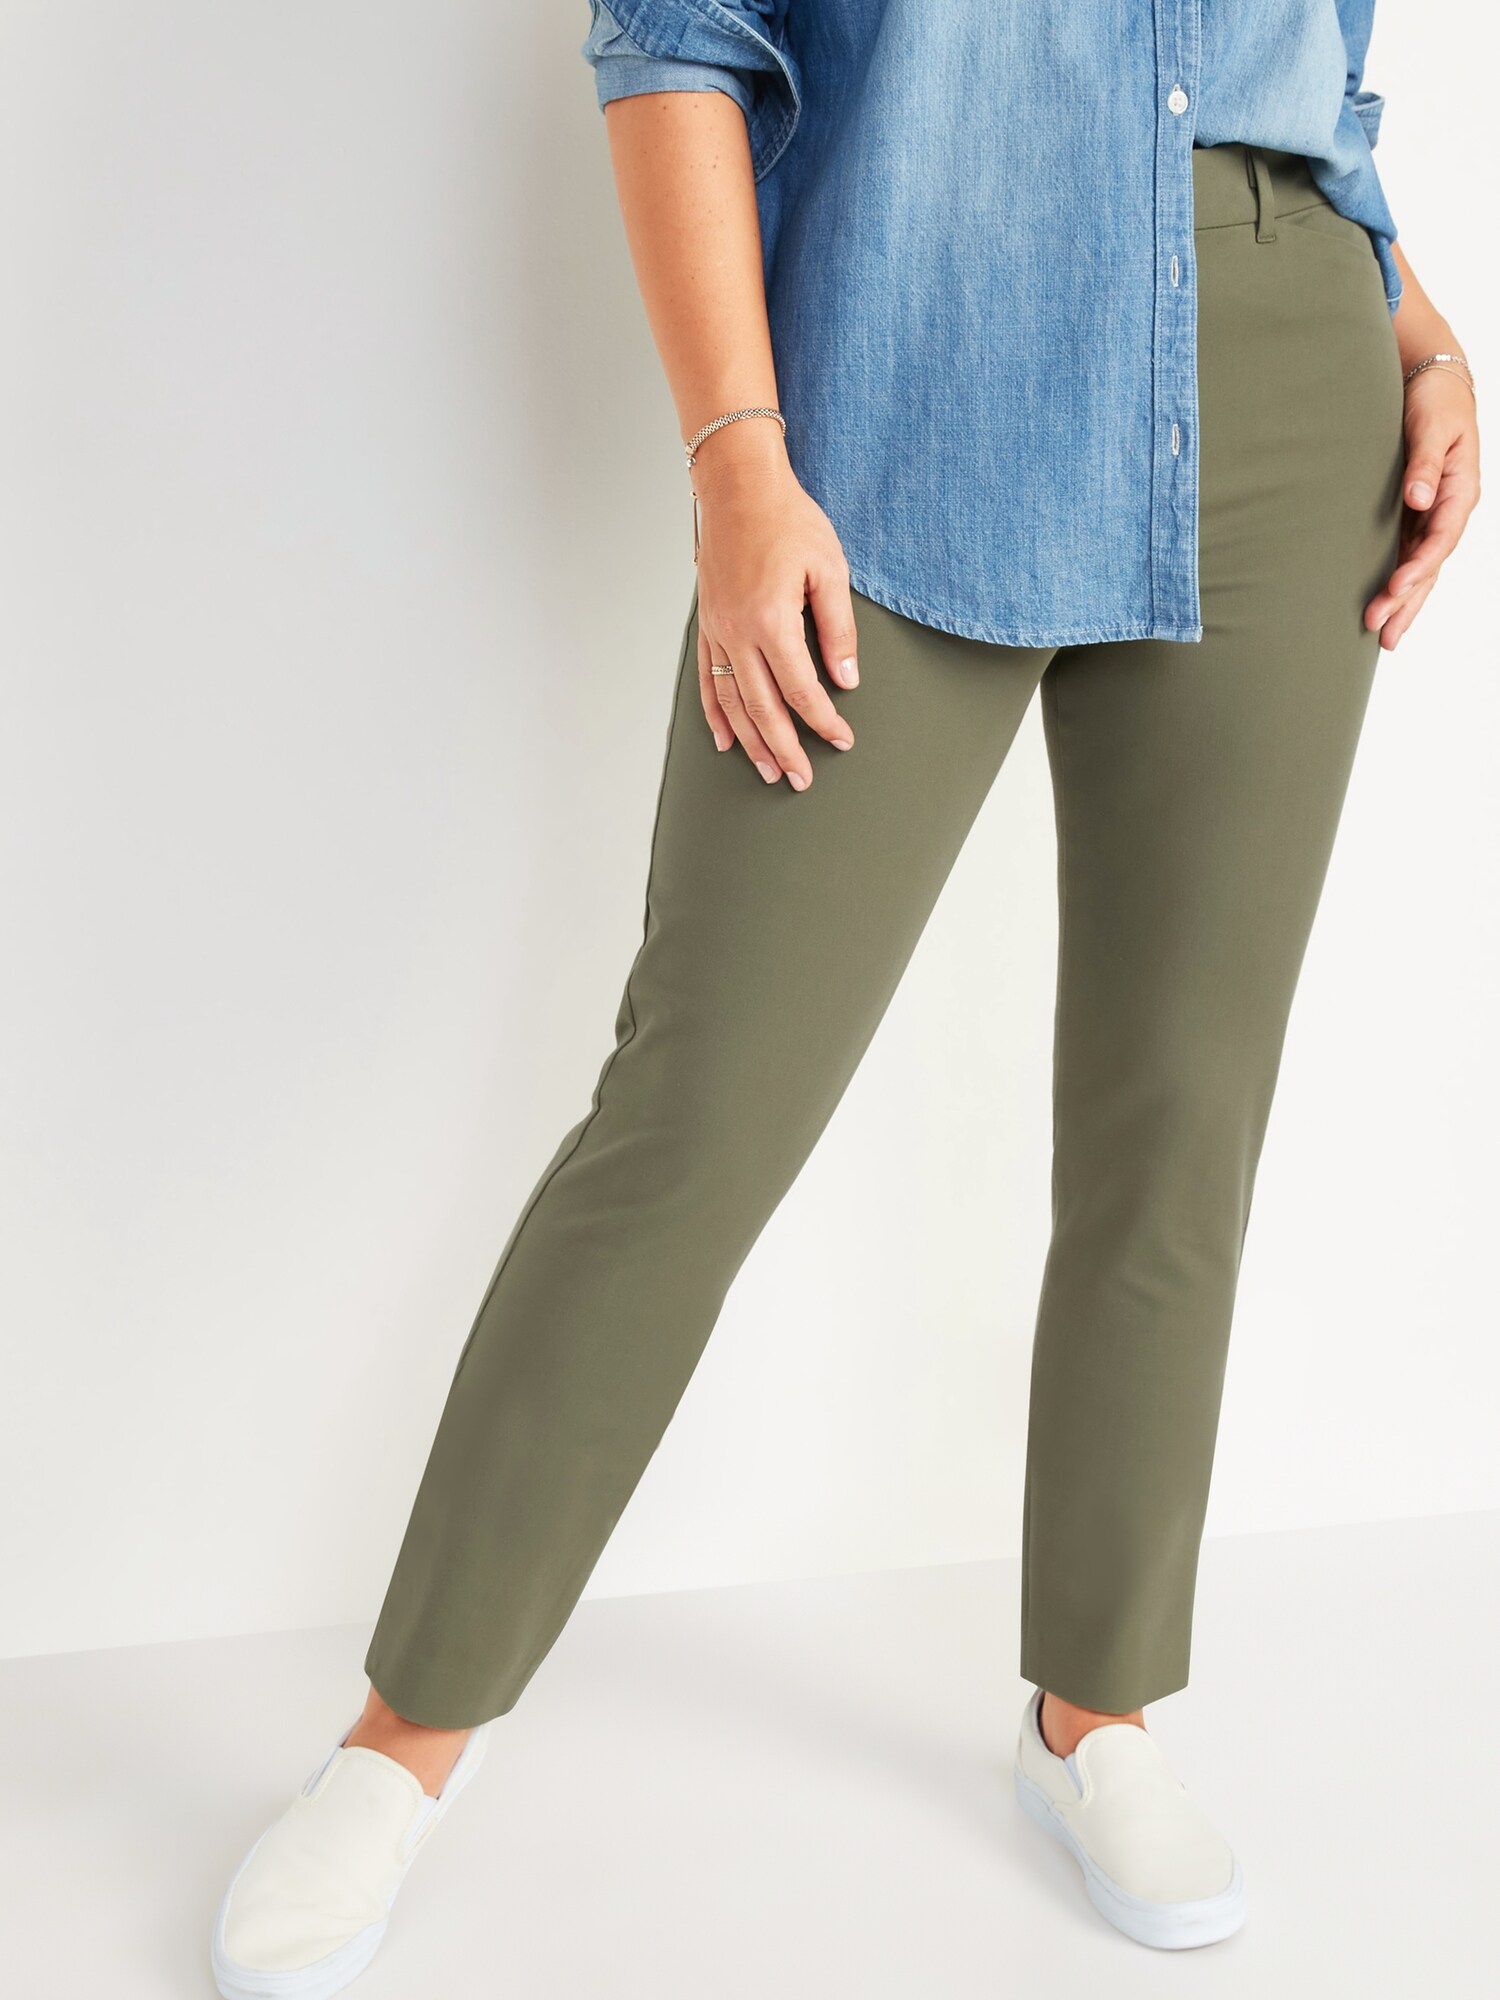 NWT Old Navy Pixie Pants Chinos // Size 16 // Choose Yours // Free Shipping 